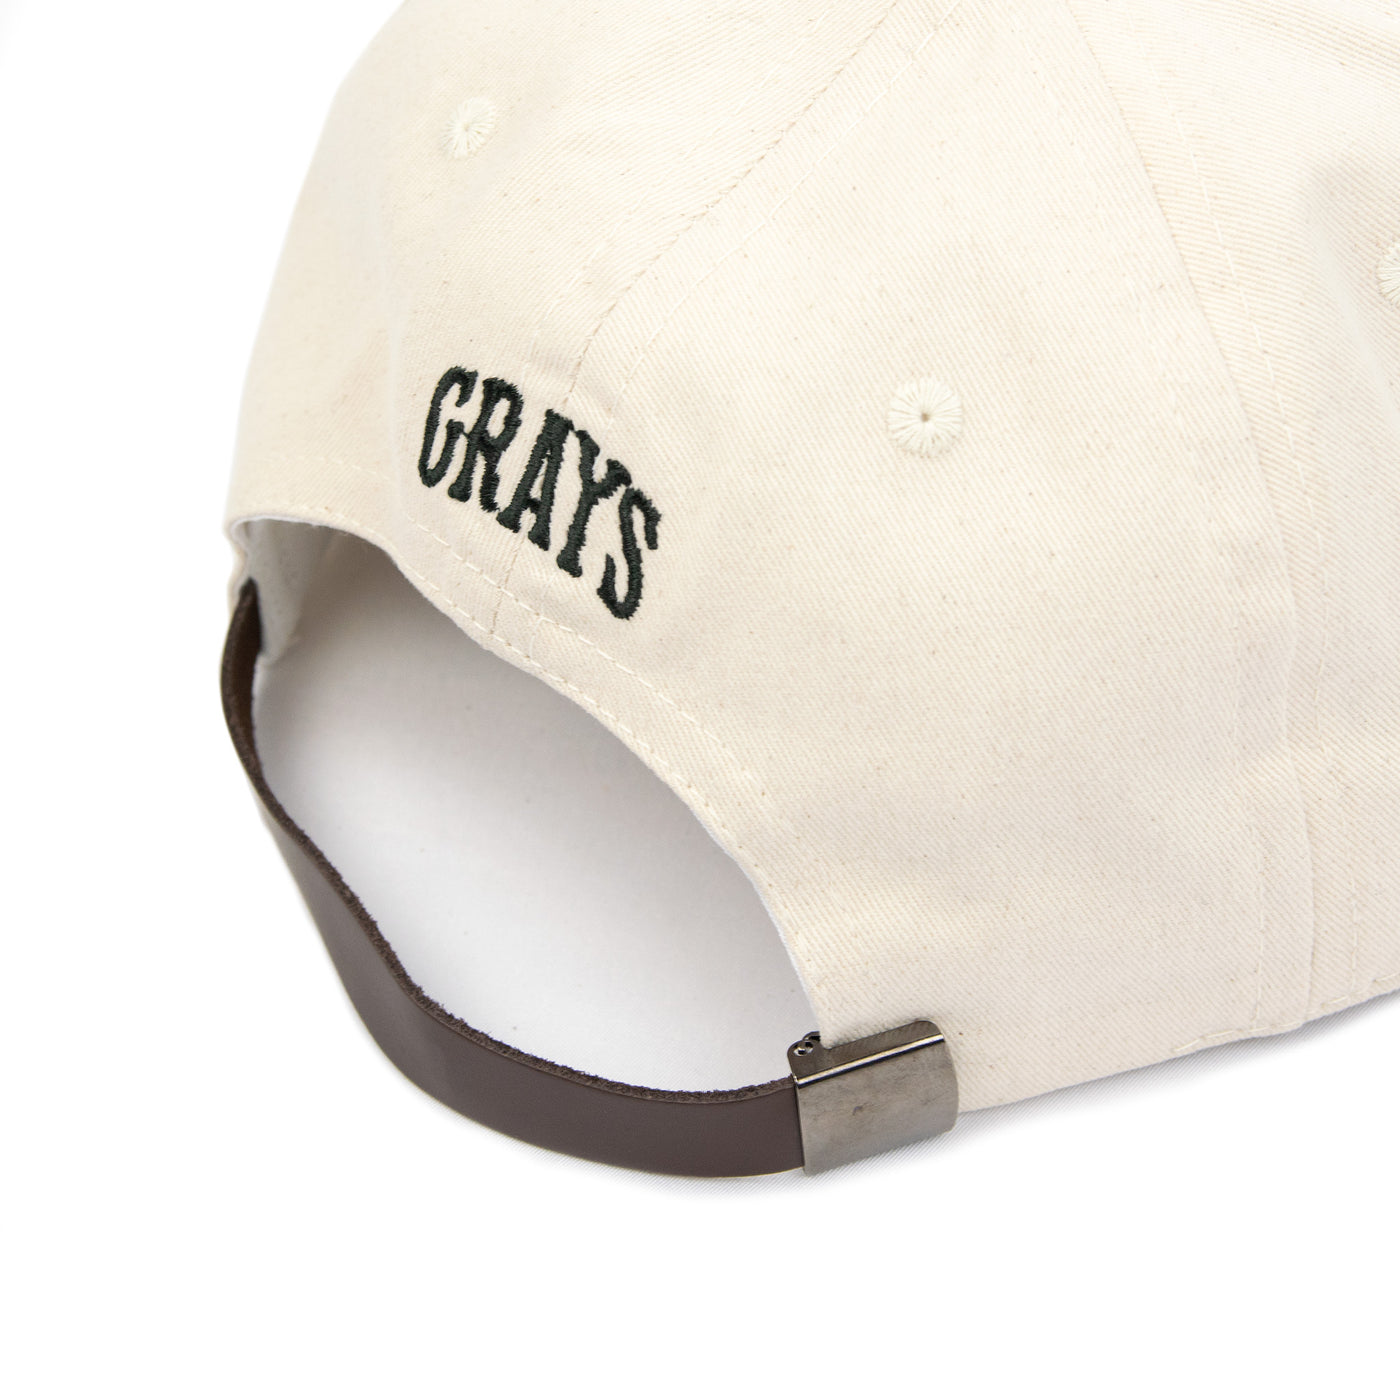 Ebbets Field Flannels Homestead Grays Vintage Inspired Baseball Cap Made in USA Rear